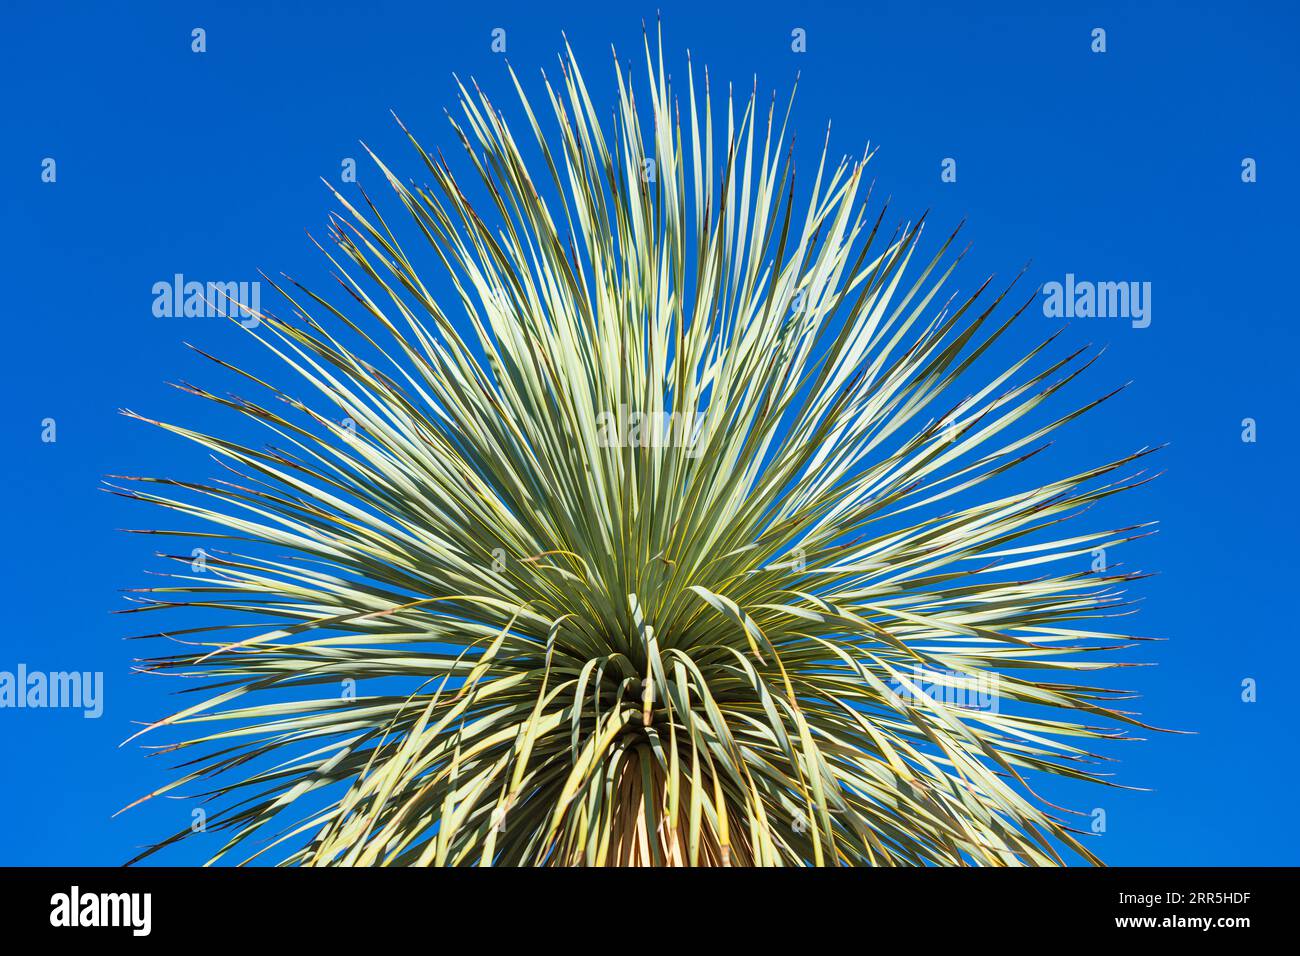 Indian Wells, California, USA. Large yucca plants in the desert. Stock Photo